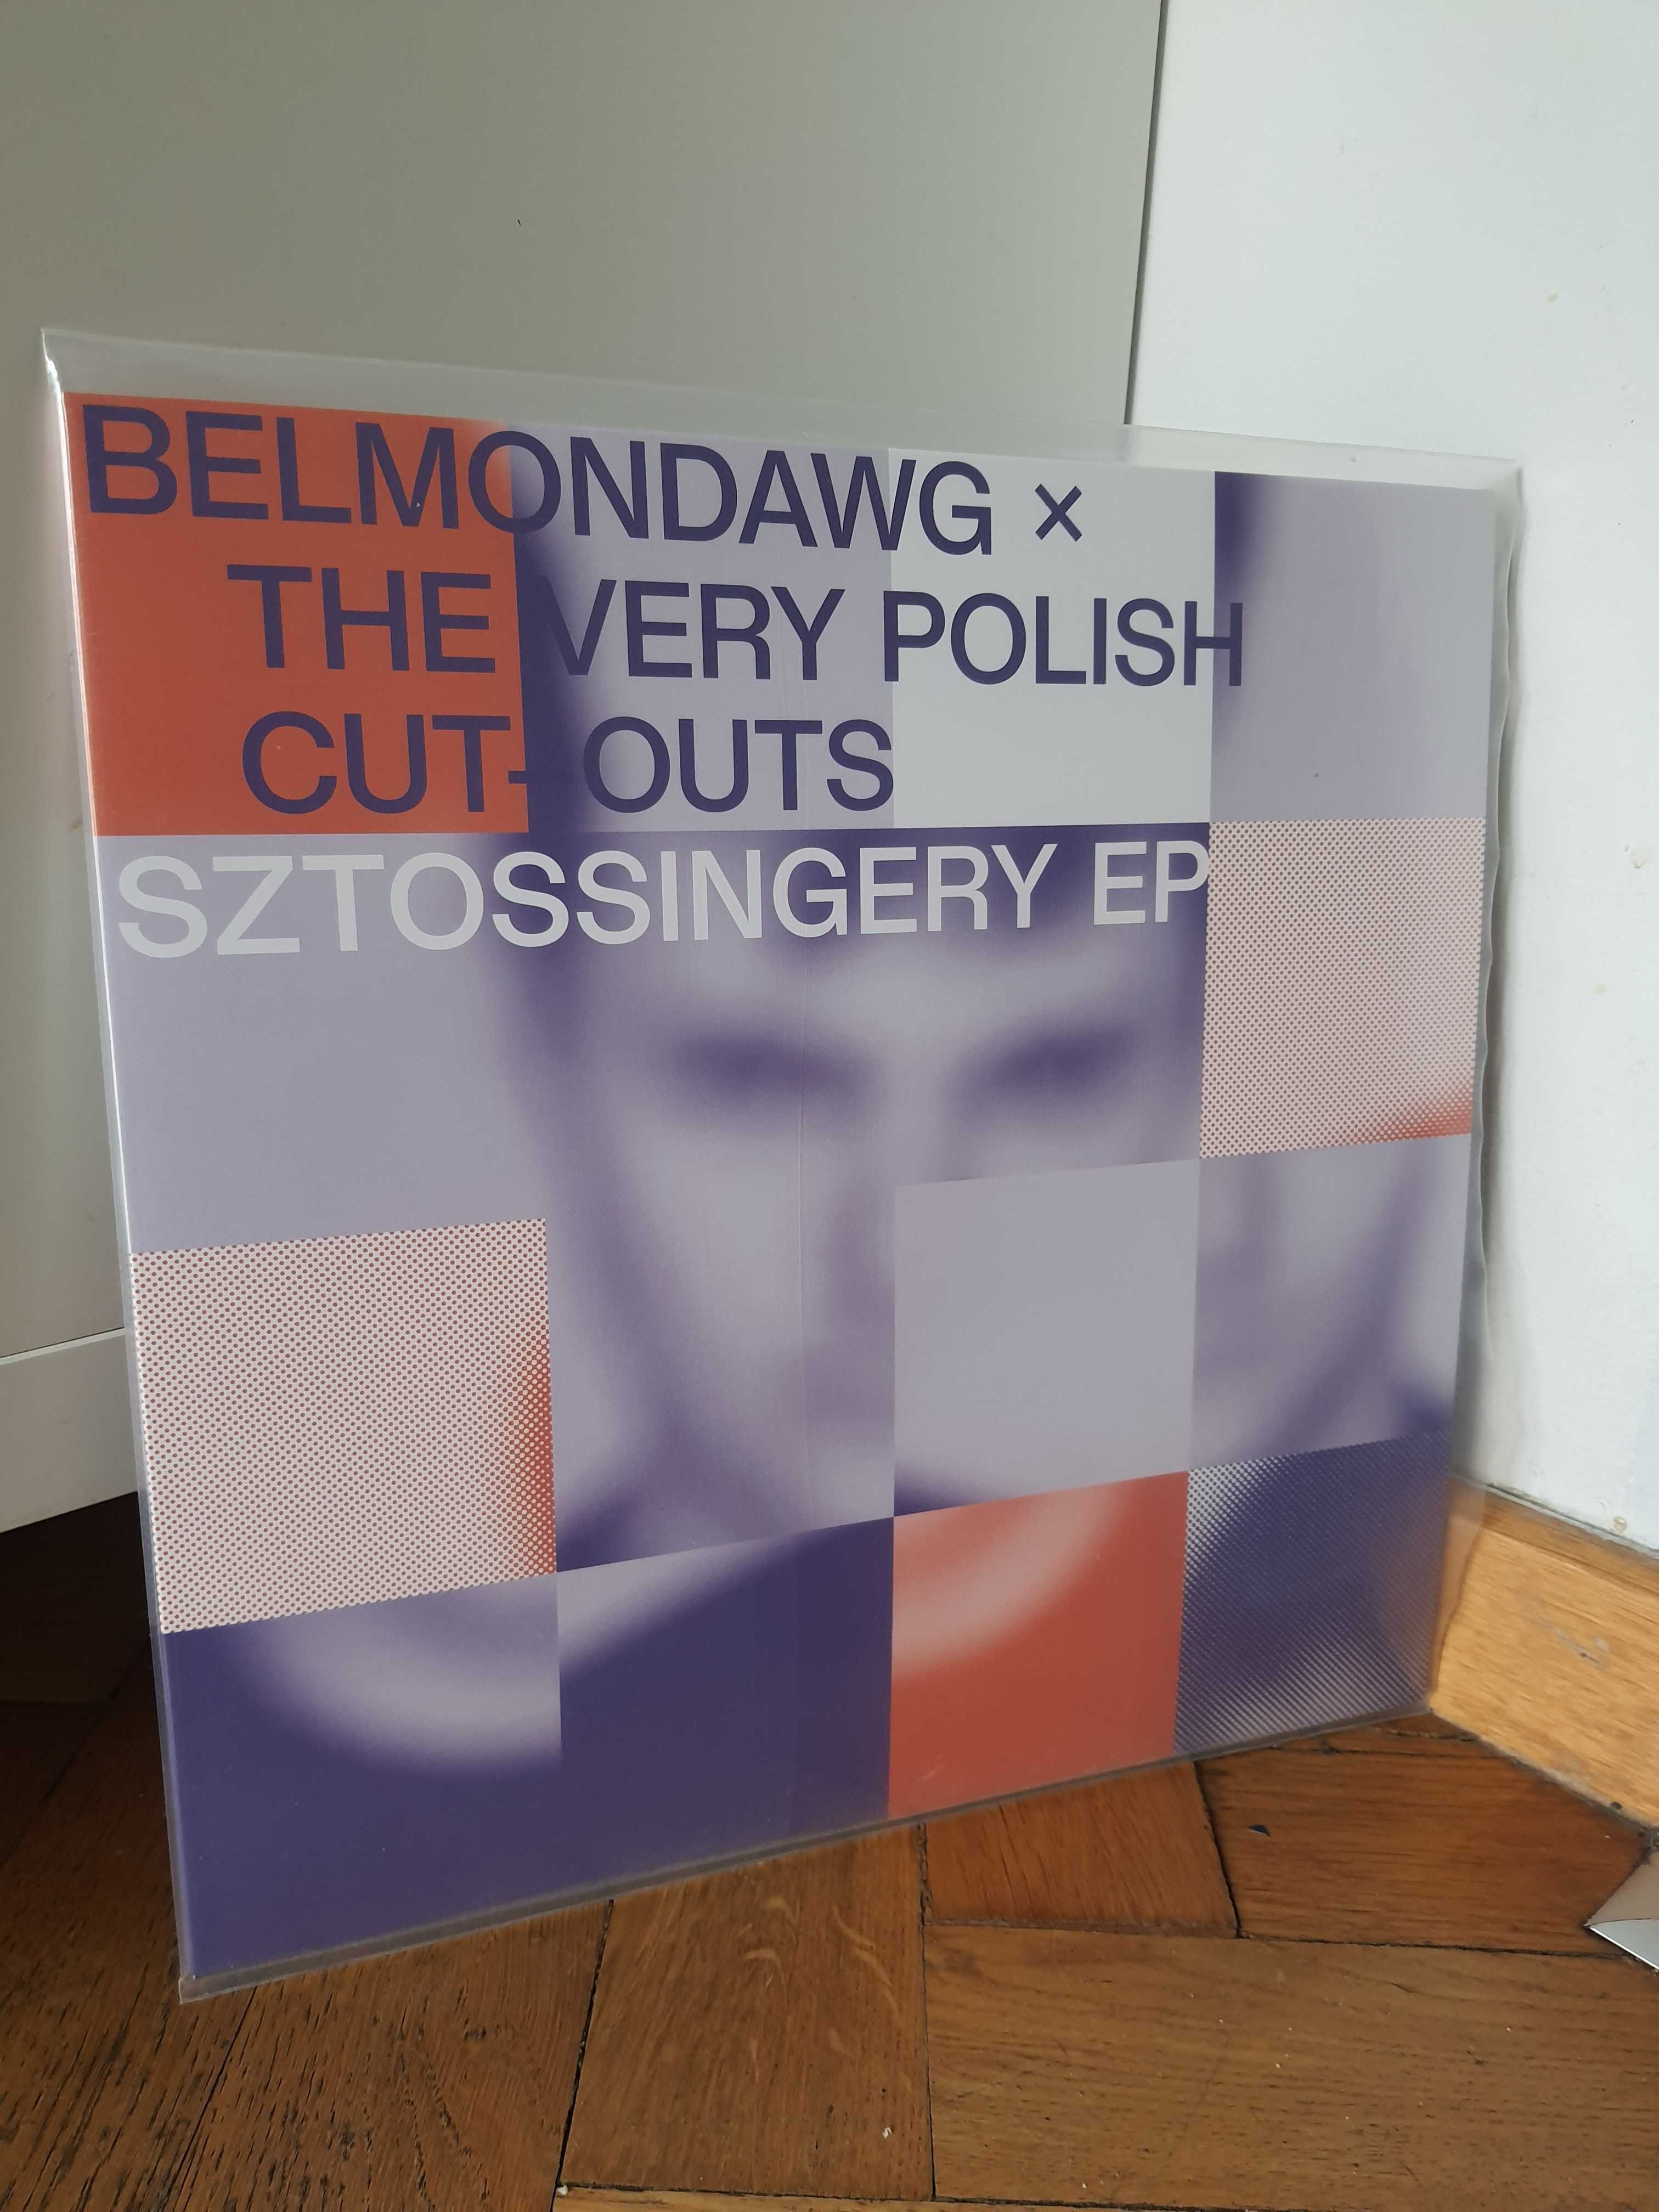 Belmondawg x The Very Polish Cut Outs – Sztossingery EP